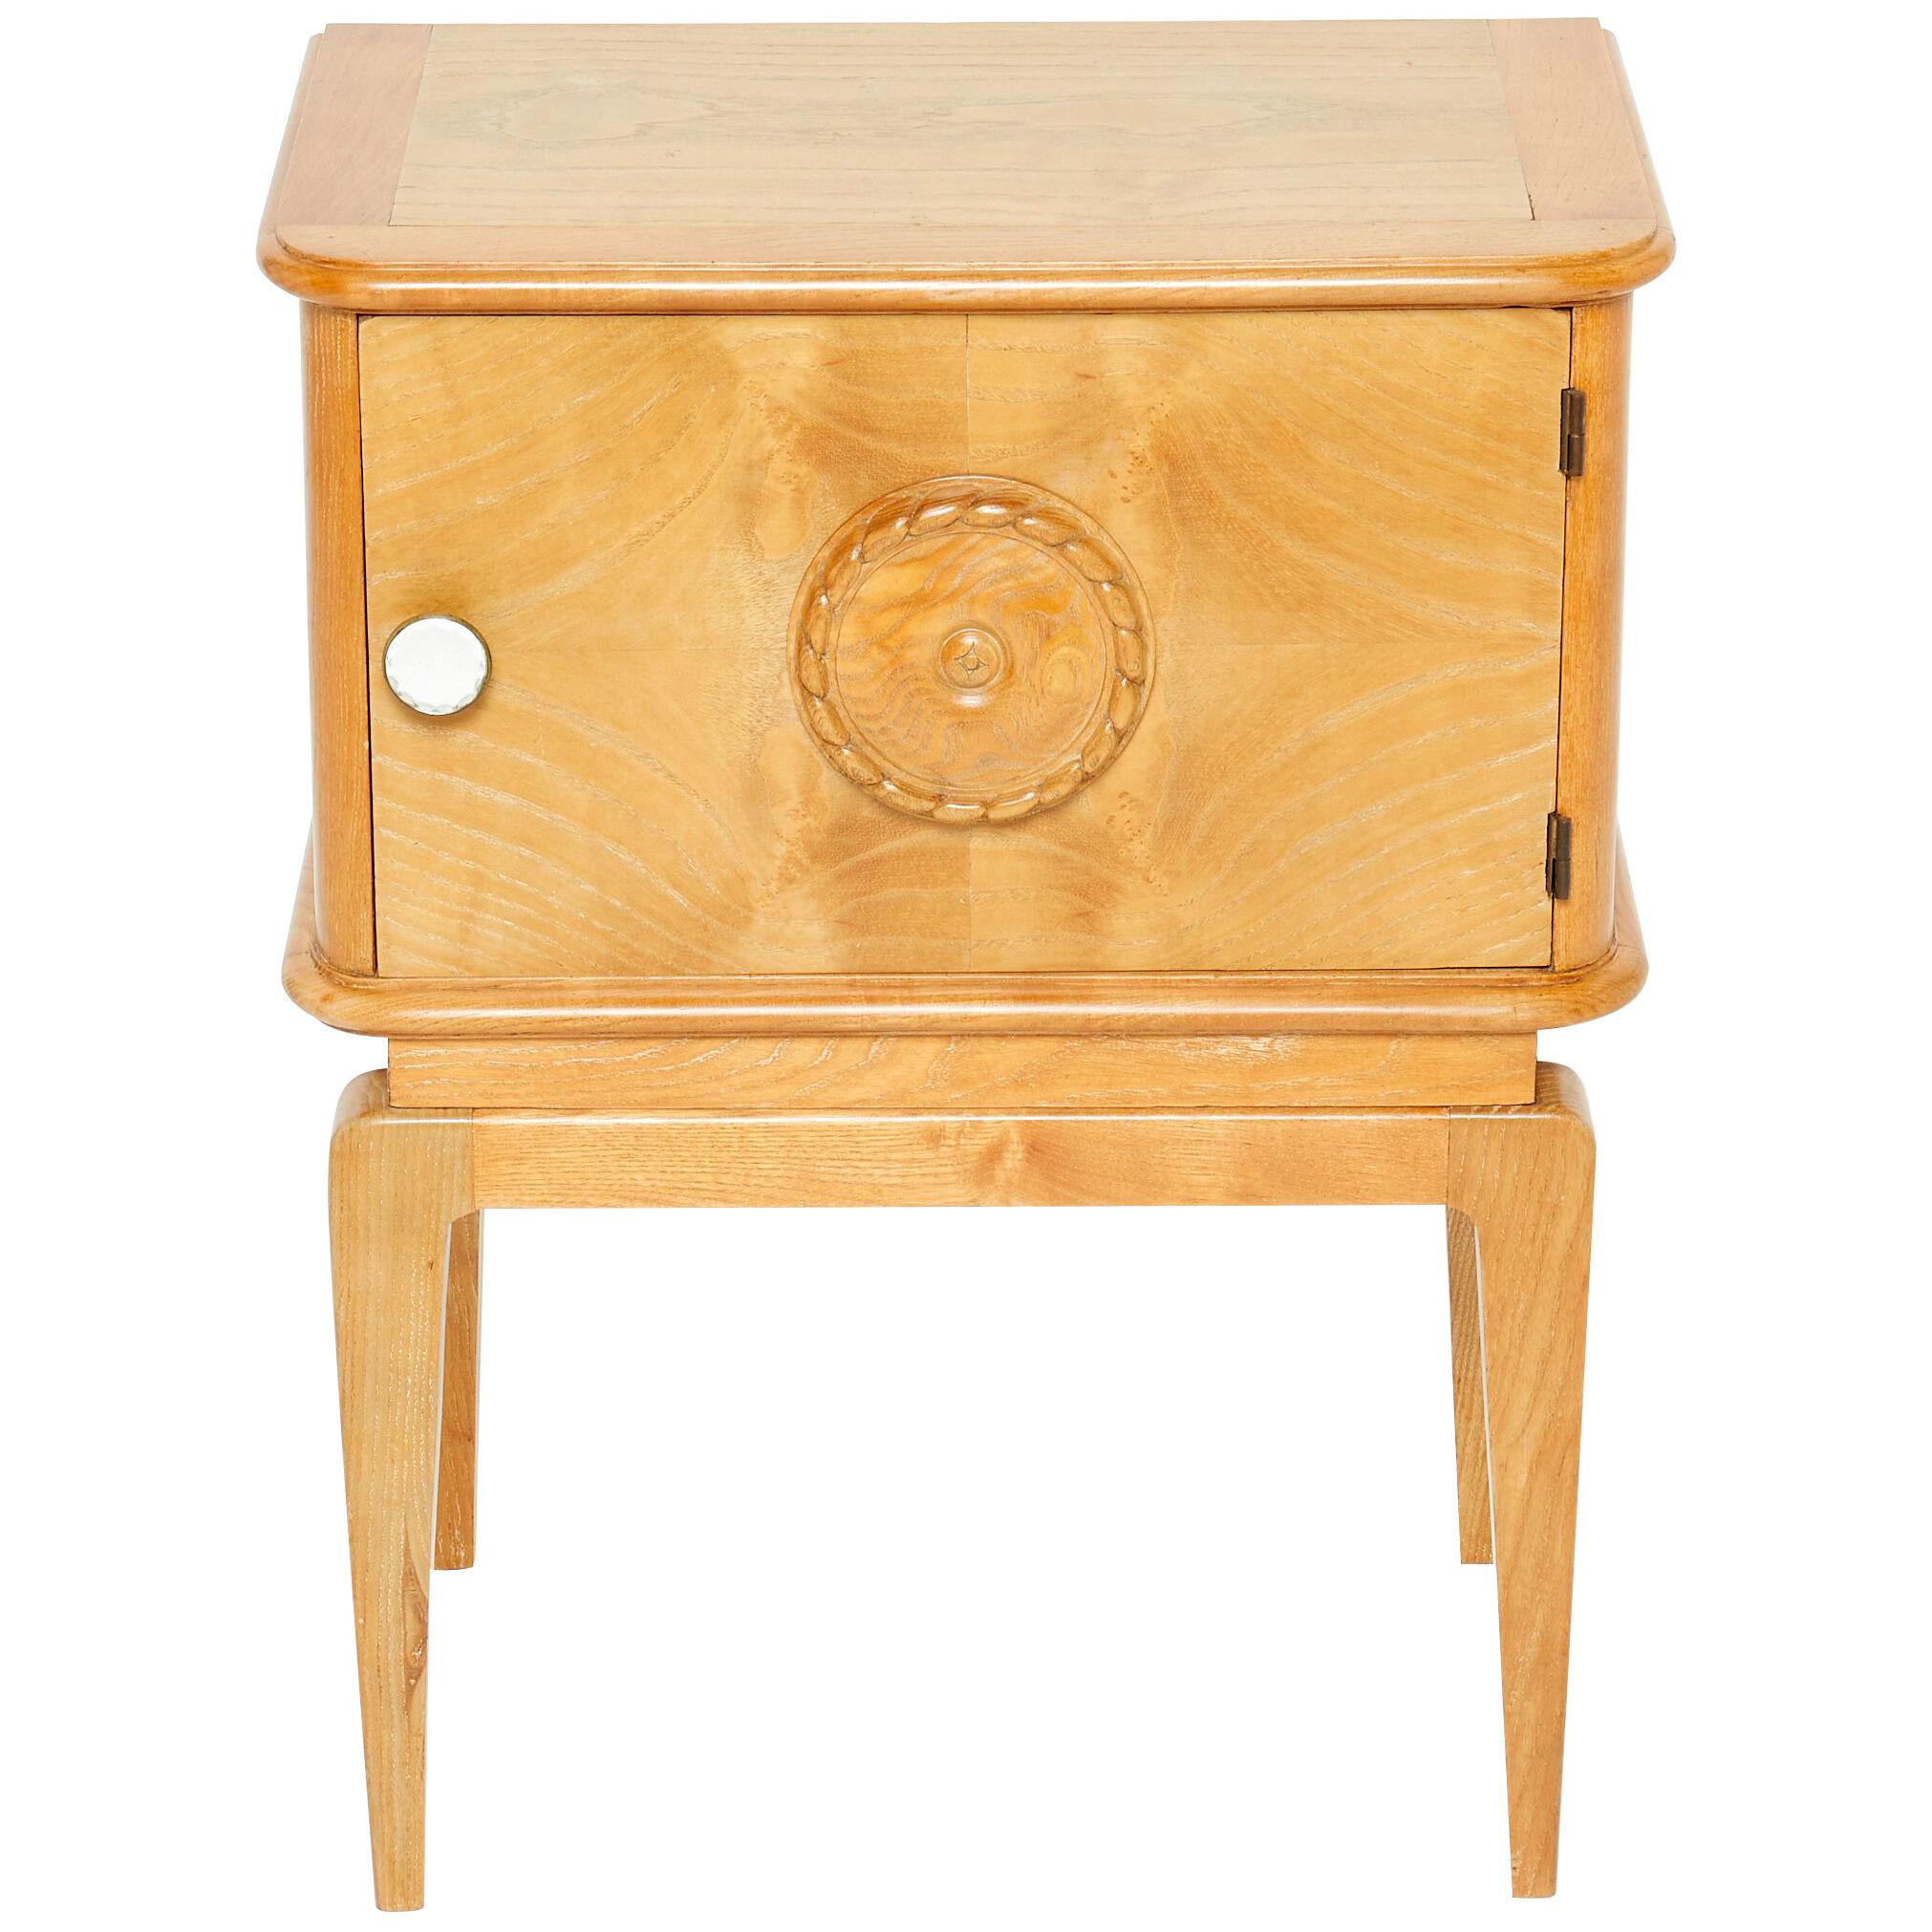 French Art Deco Carved Ash Wood Nightstand, 1940s